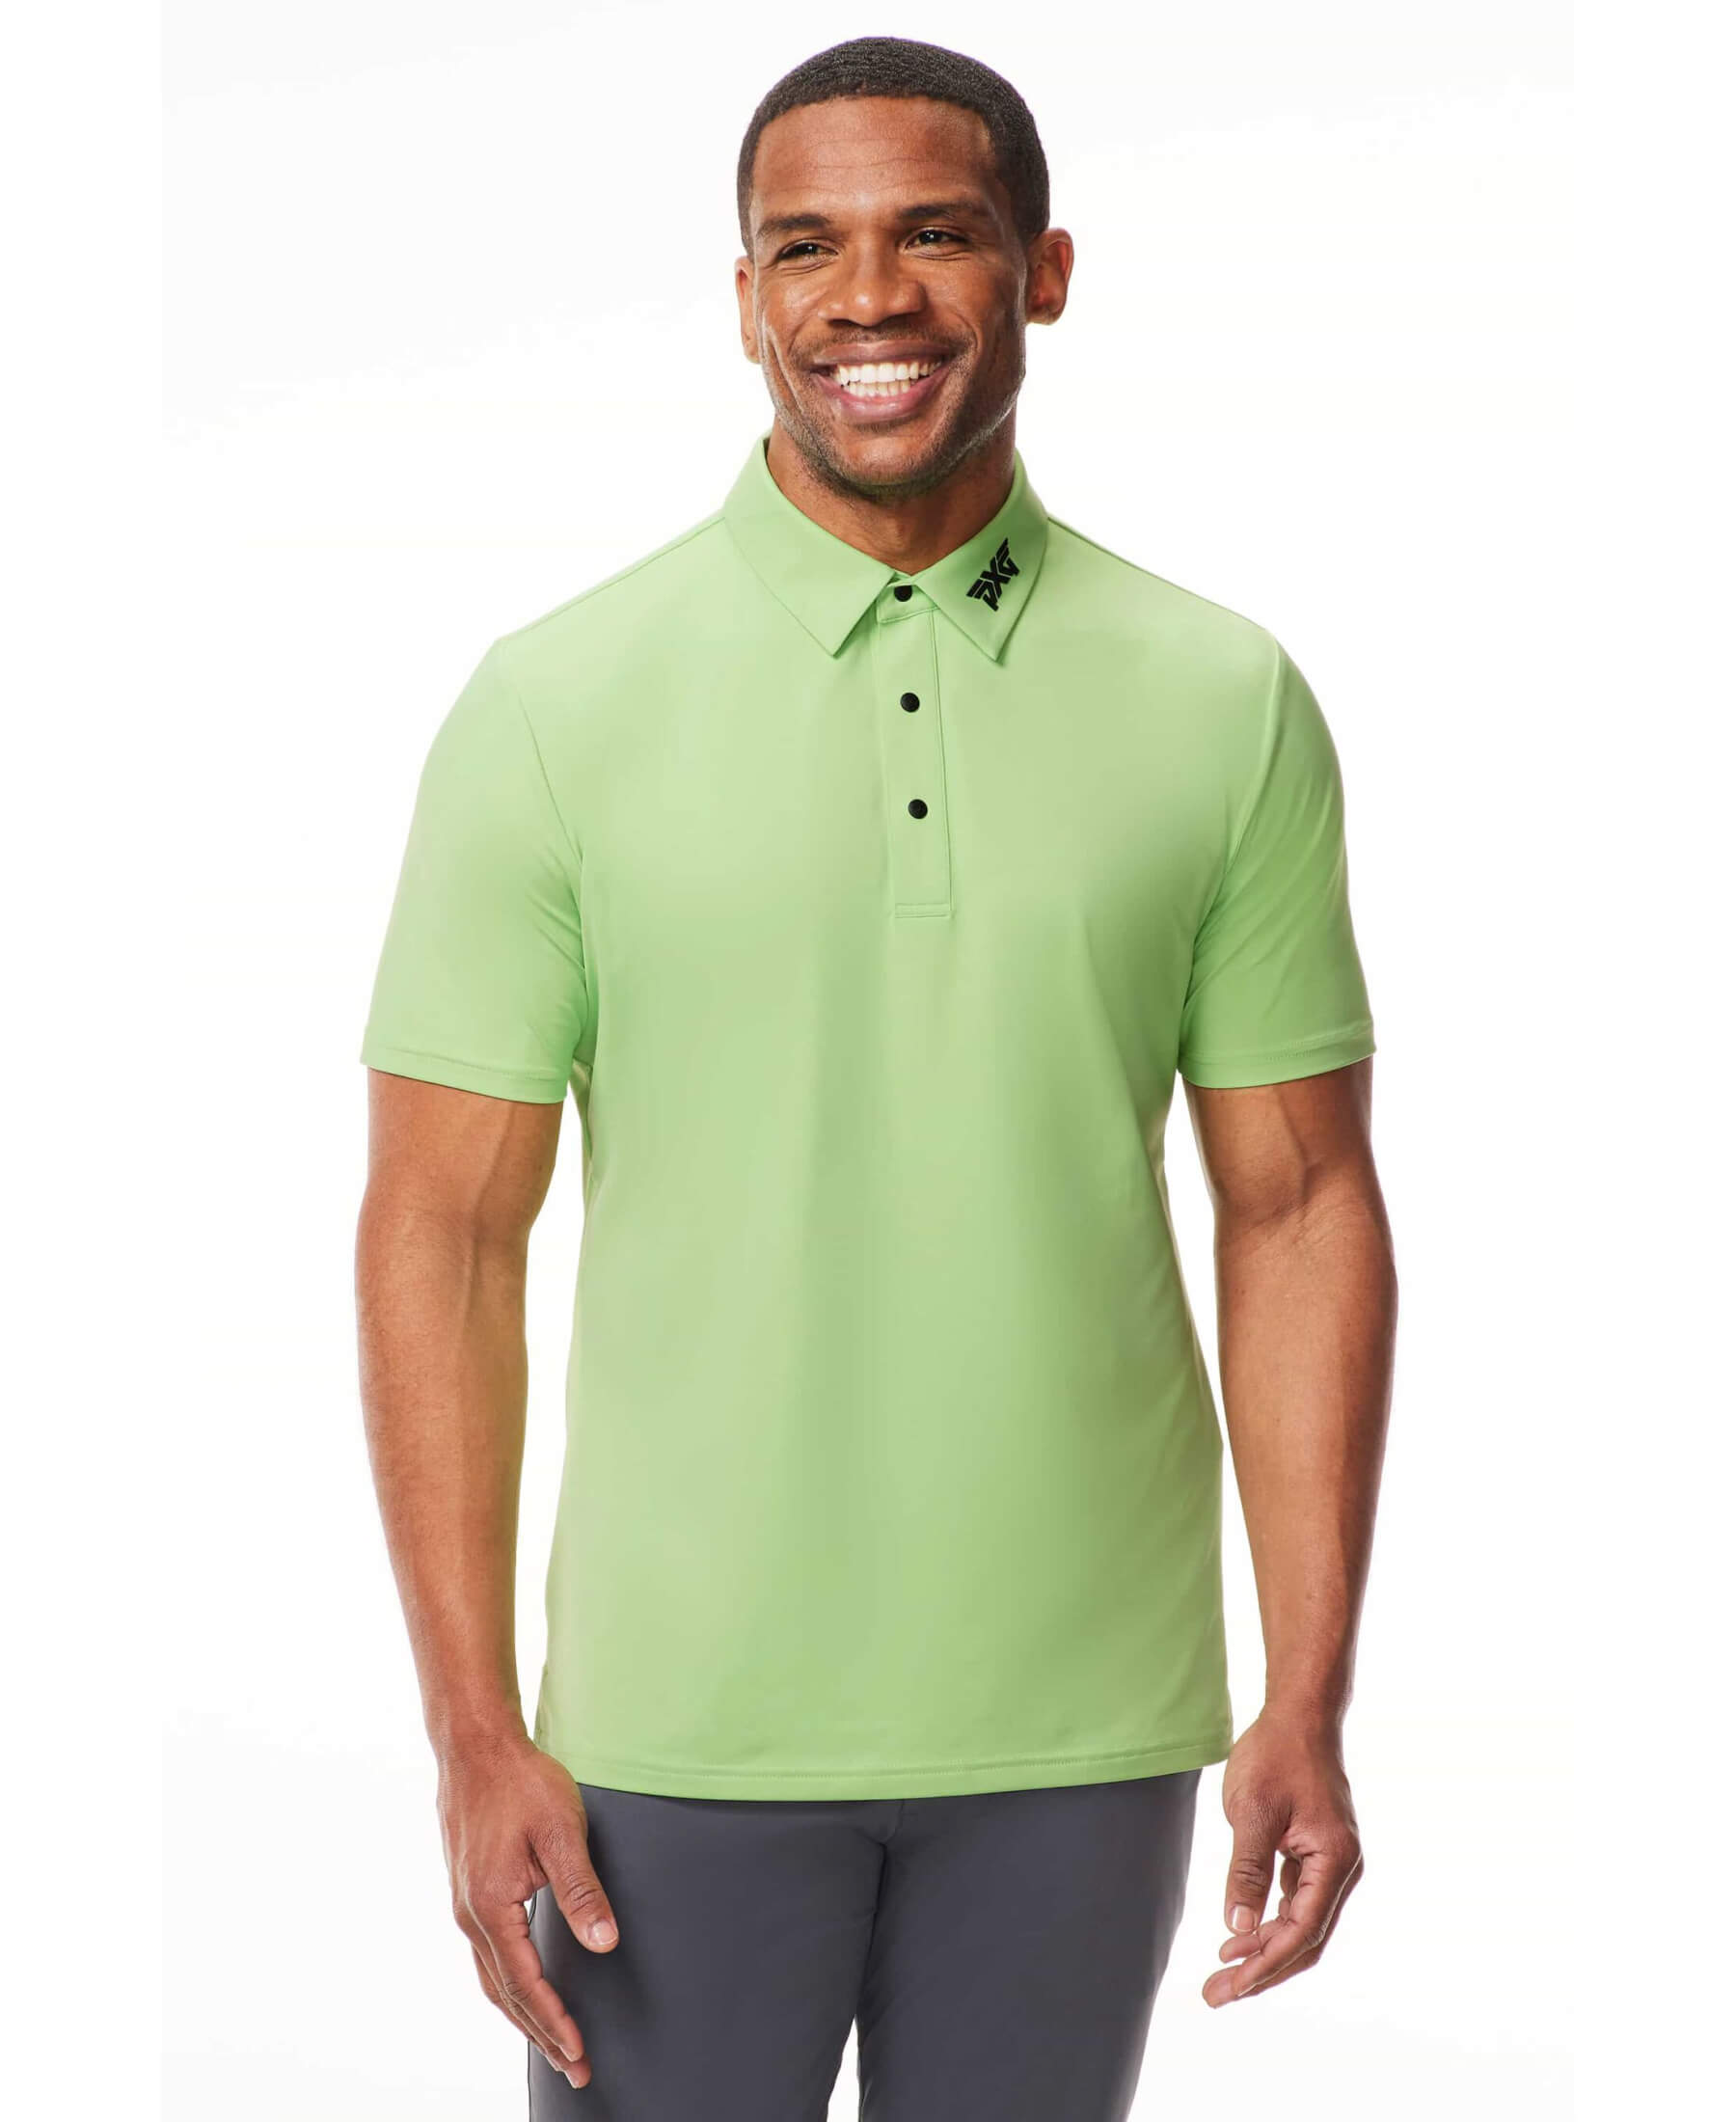 Athletic Fit BP Signature Polo | Shop the Highest Quality Golf Apparel ...